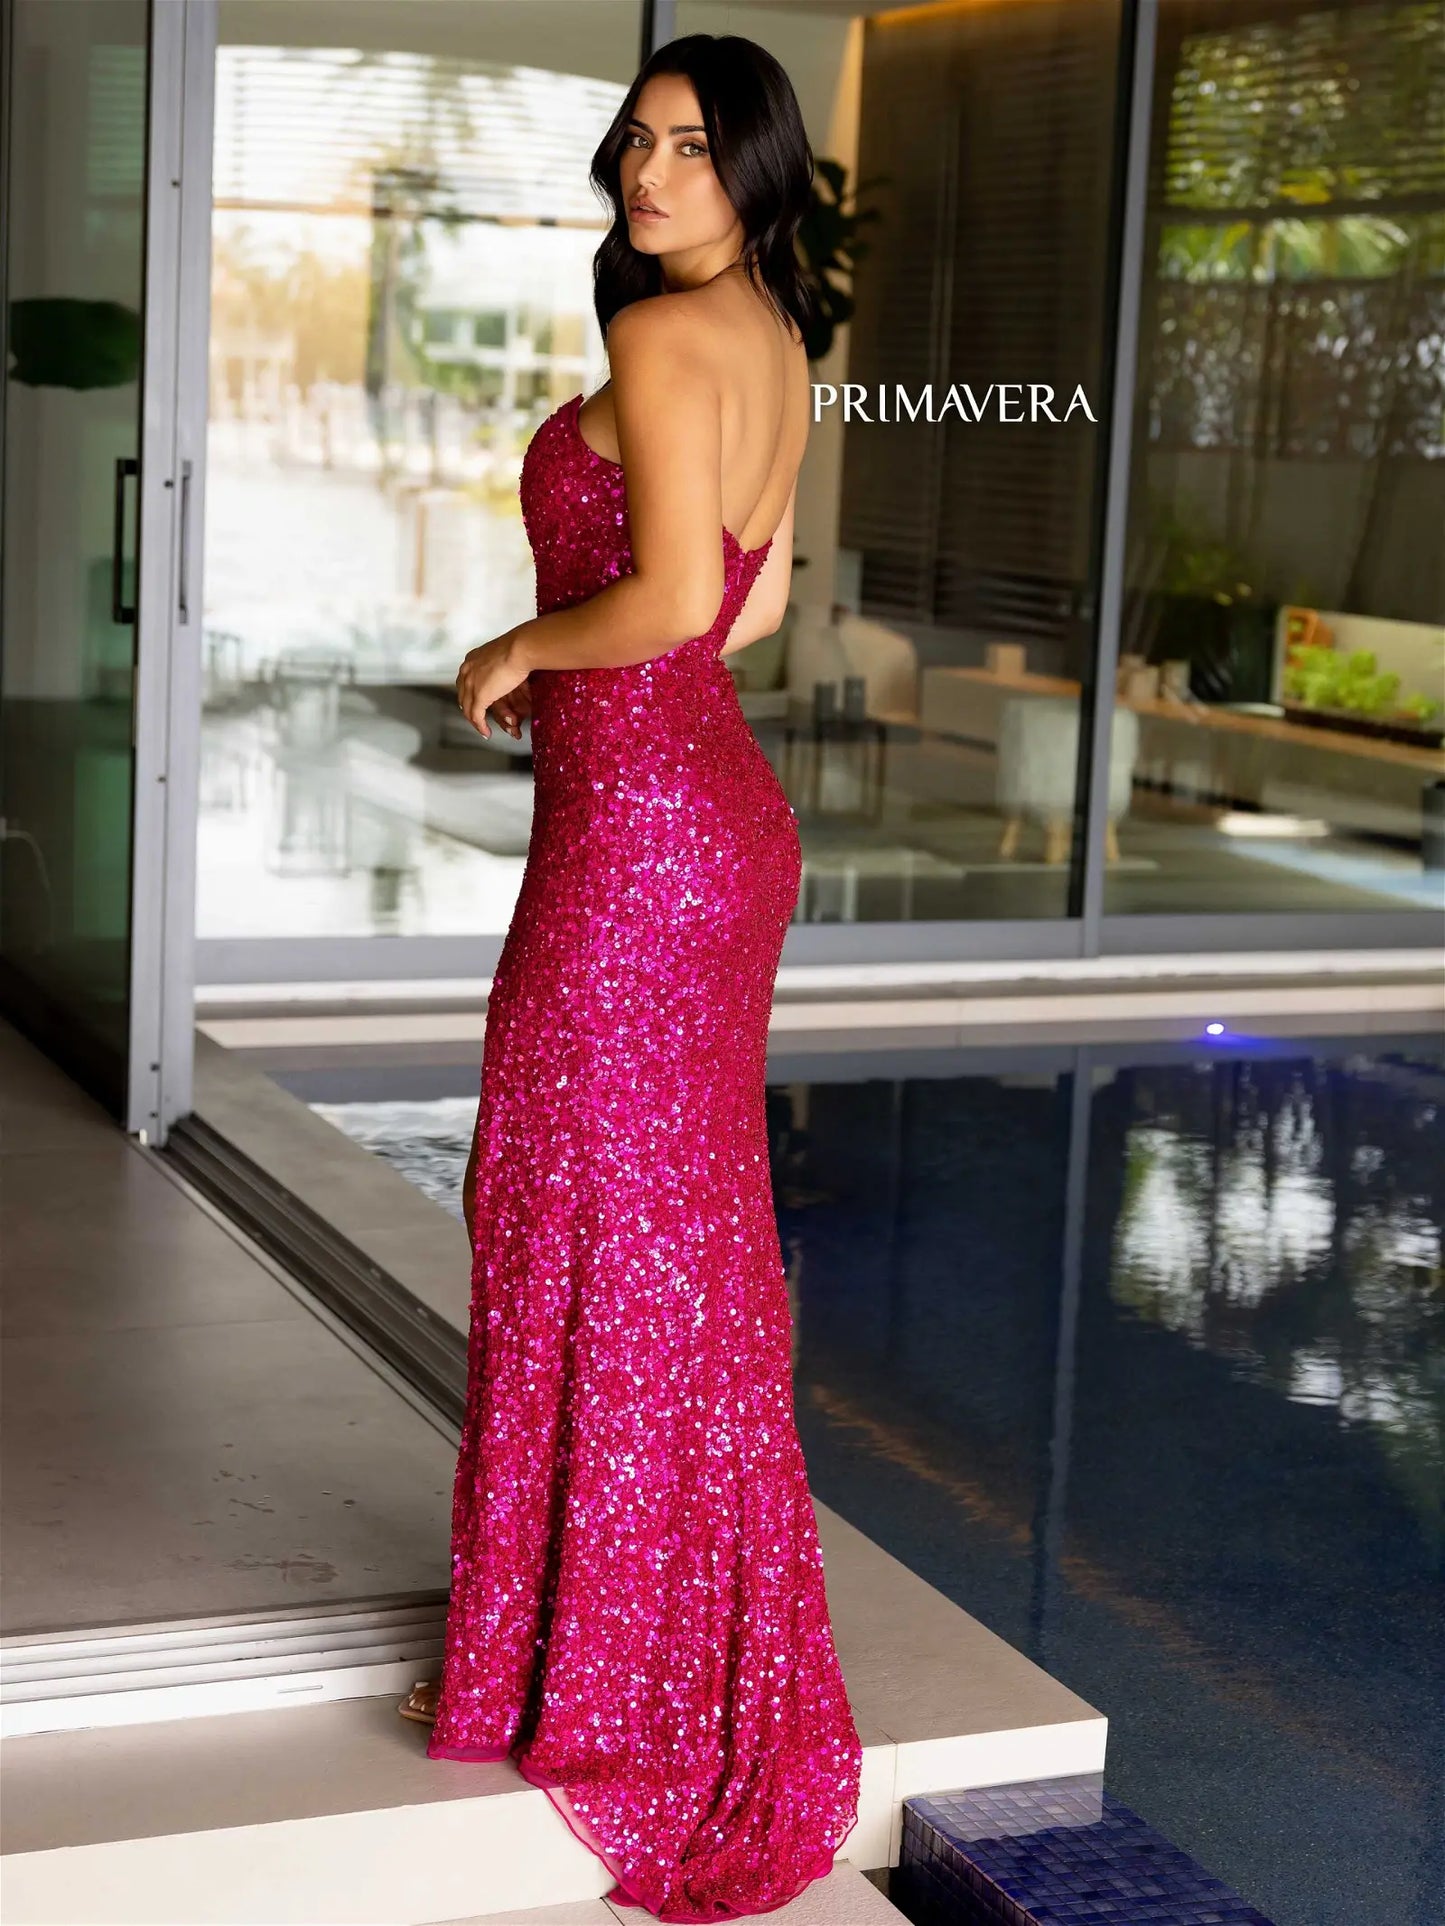 Primavera Couture 4192 Size 2,10,16 Gold Sequin Strapless Prom Dress Peak Point Pageant Gown Slit Formal